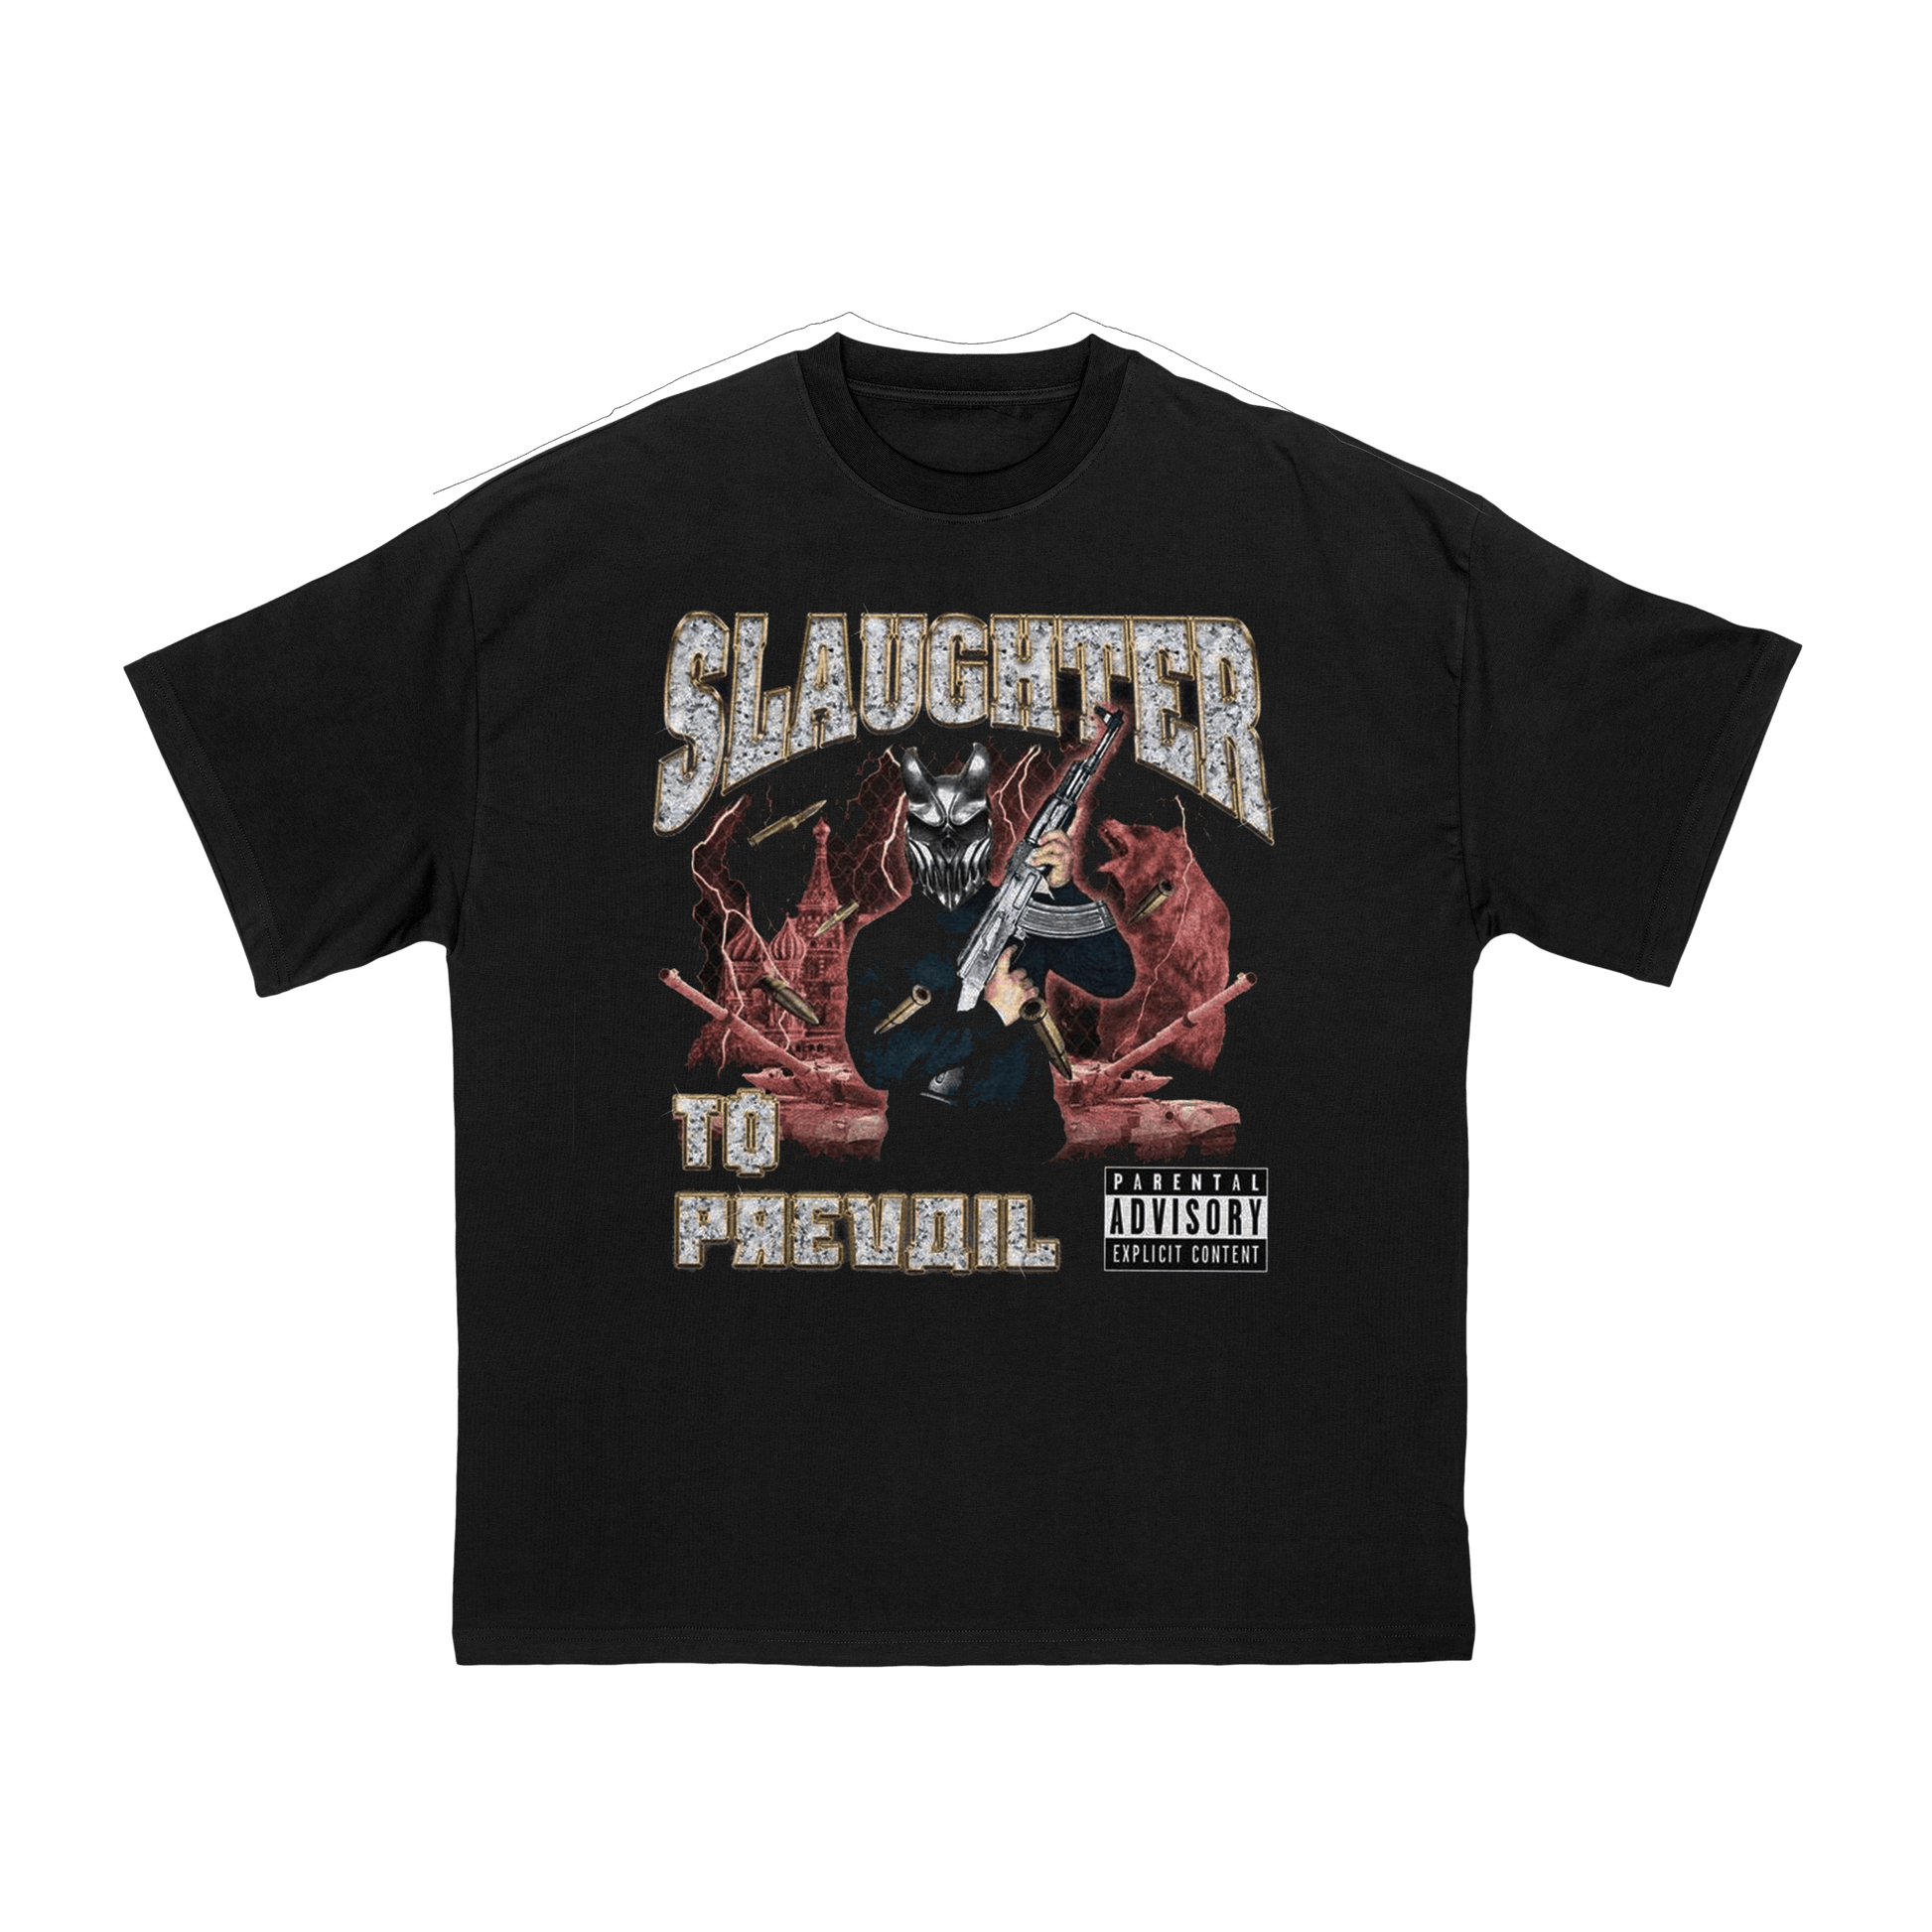 SLAUGHTER TO PREVAIL - MEMPHIS SHIRT - First Blood Merchandise